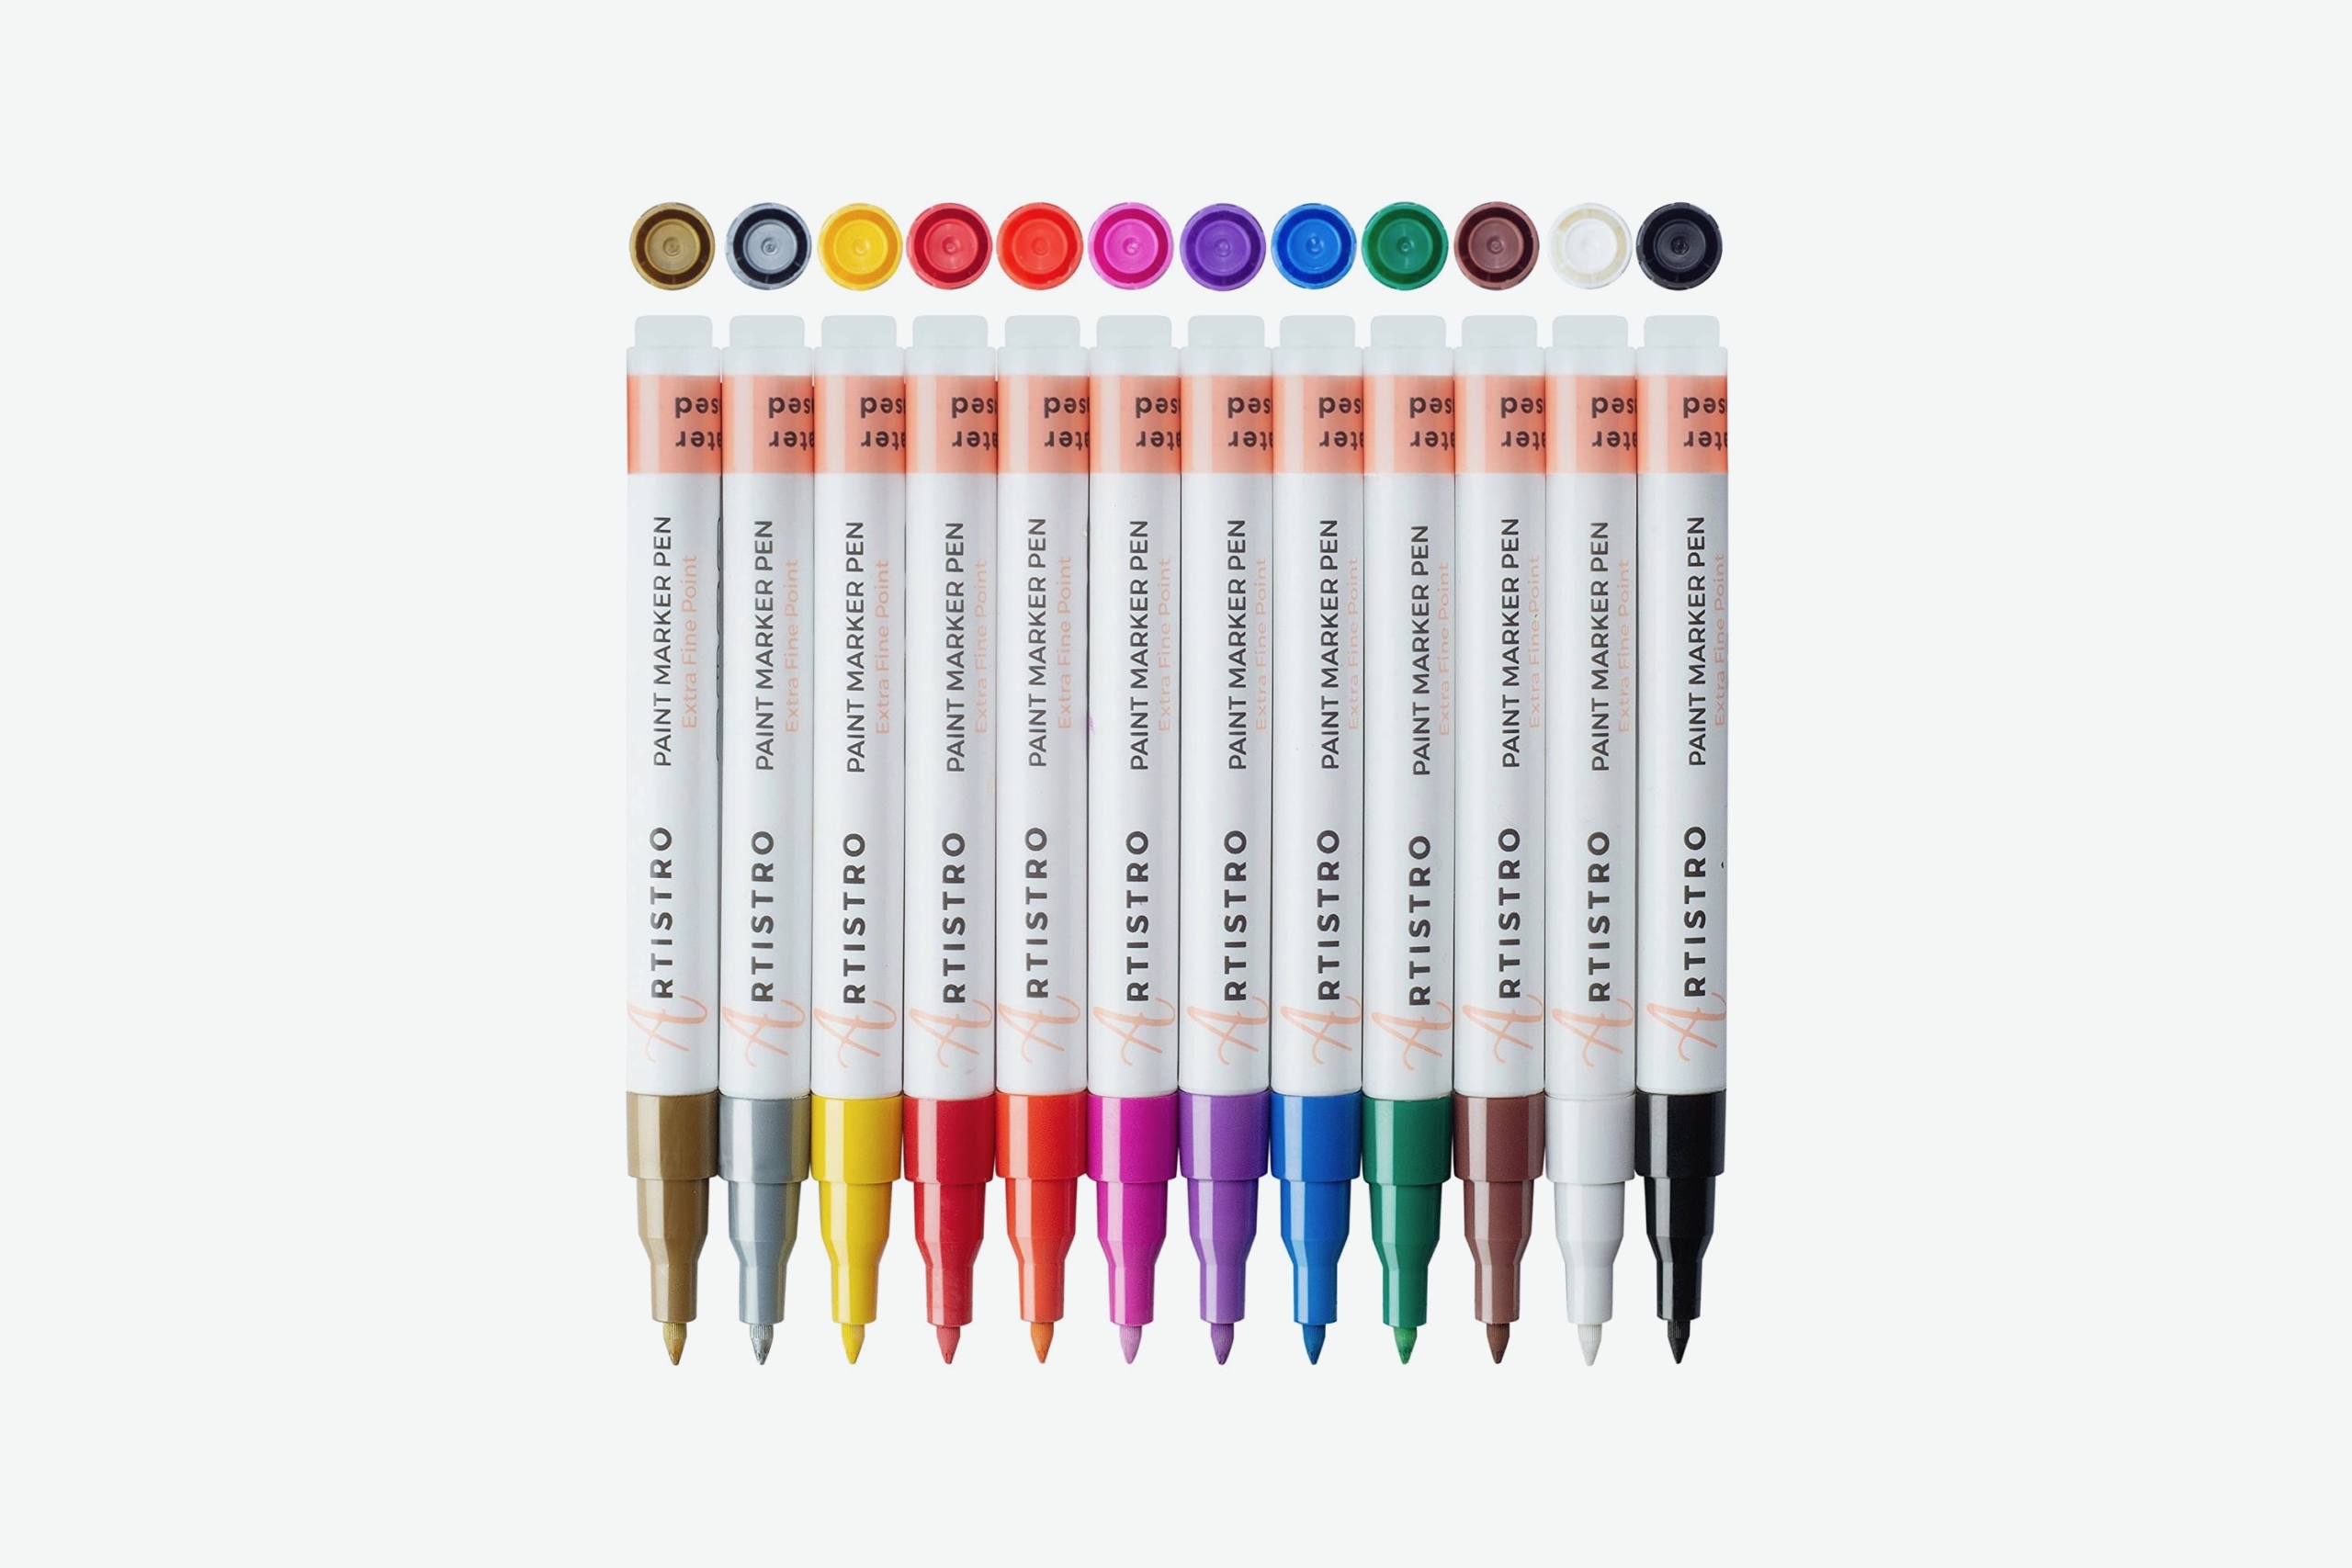 The Best Paint Pens for Wood That Will Brighten Up Your Crafts